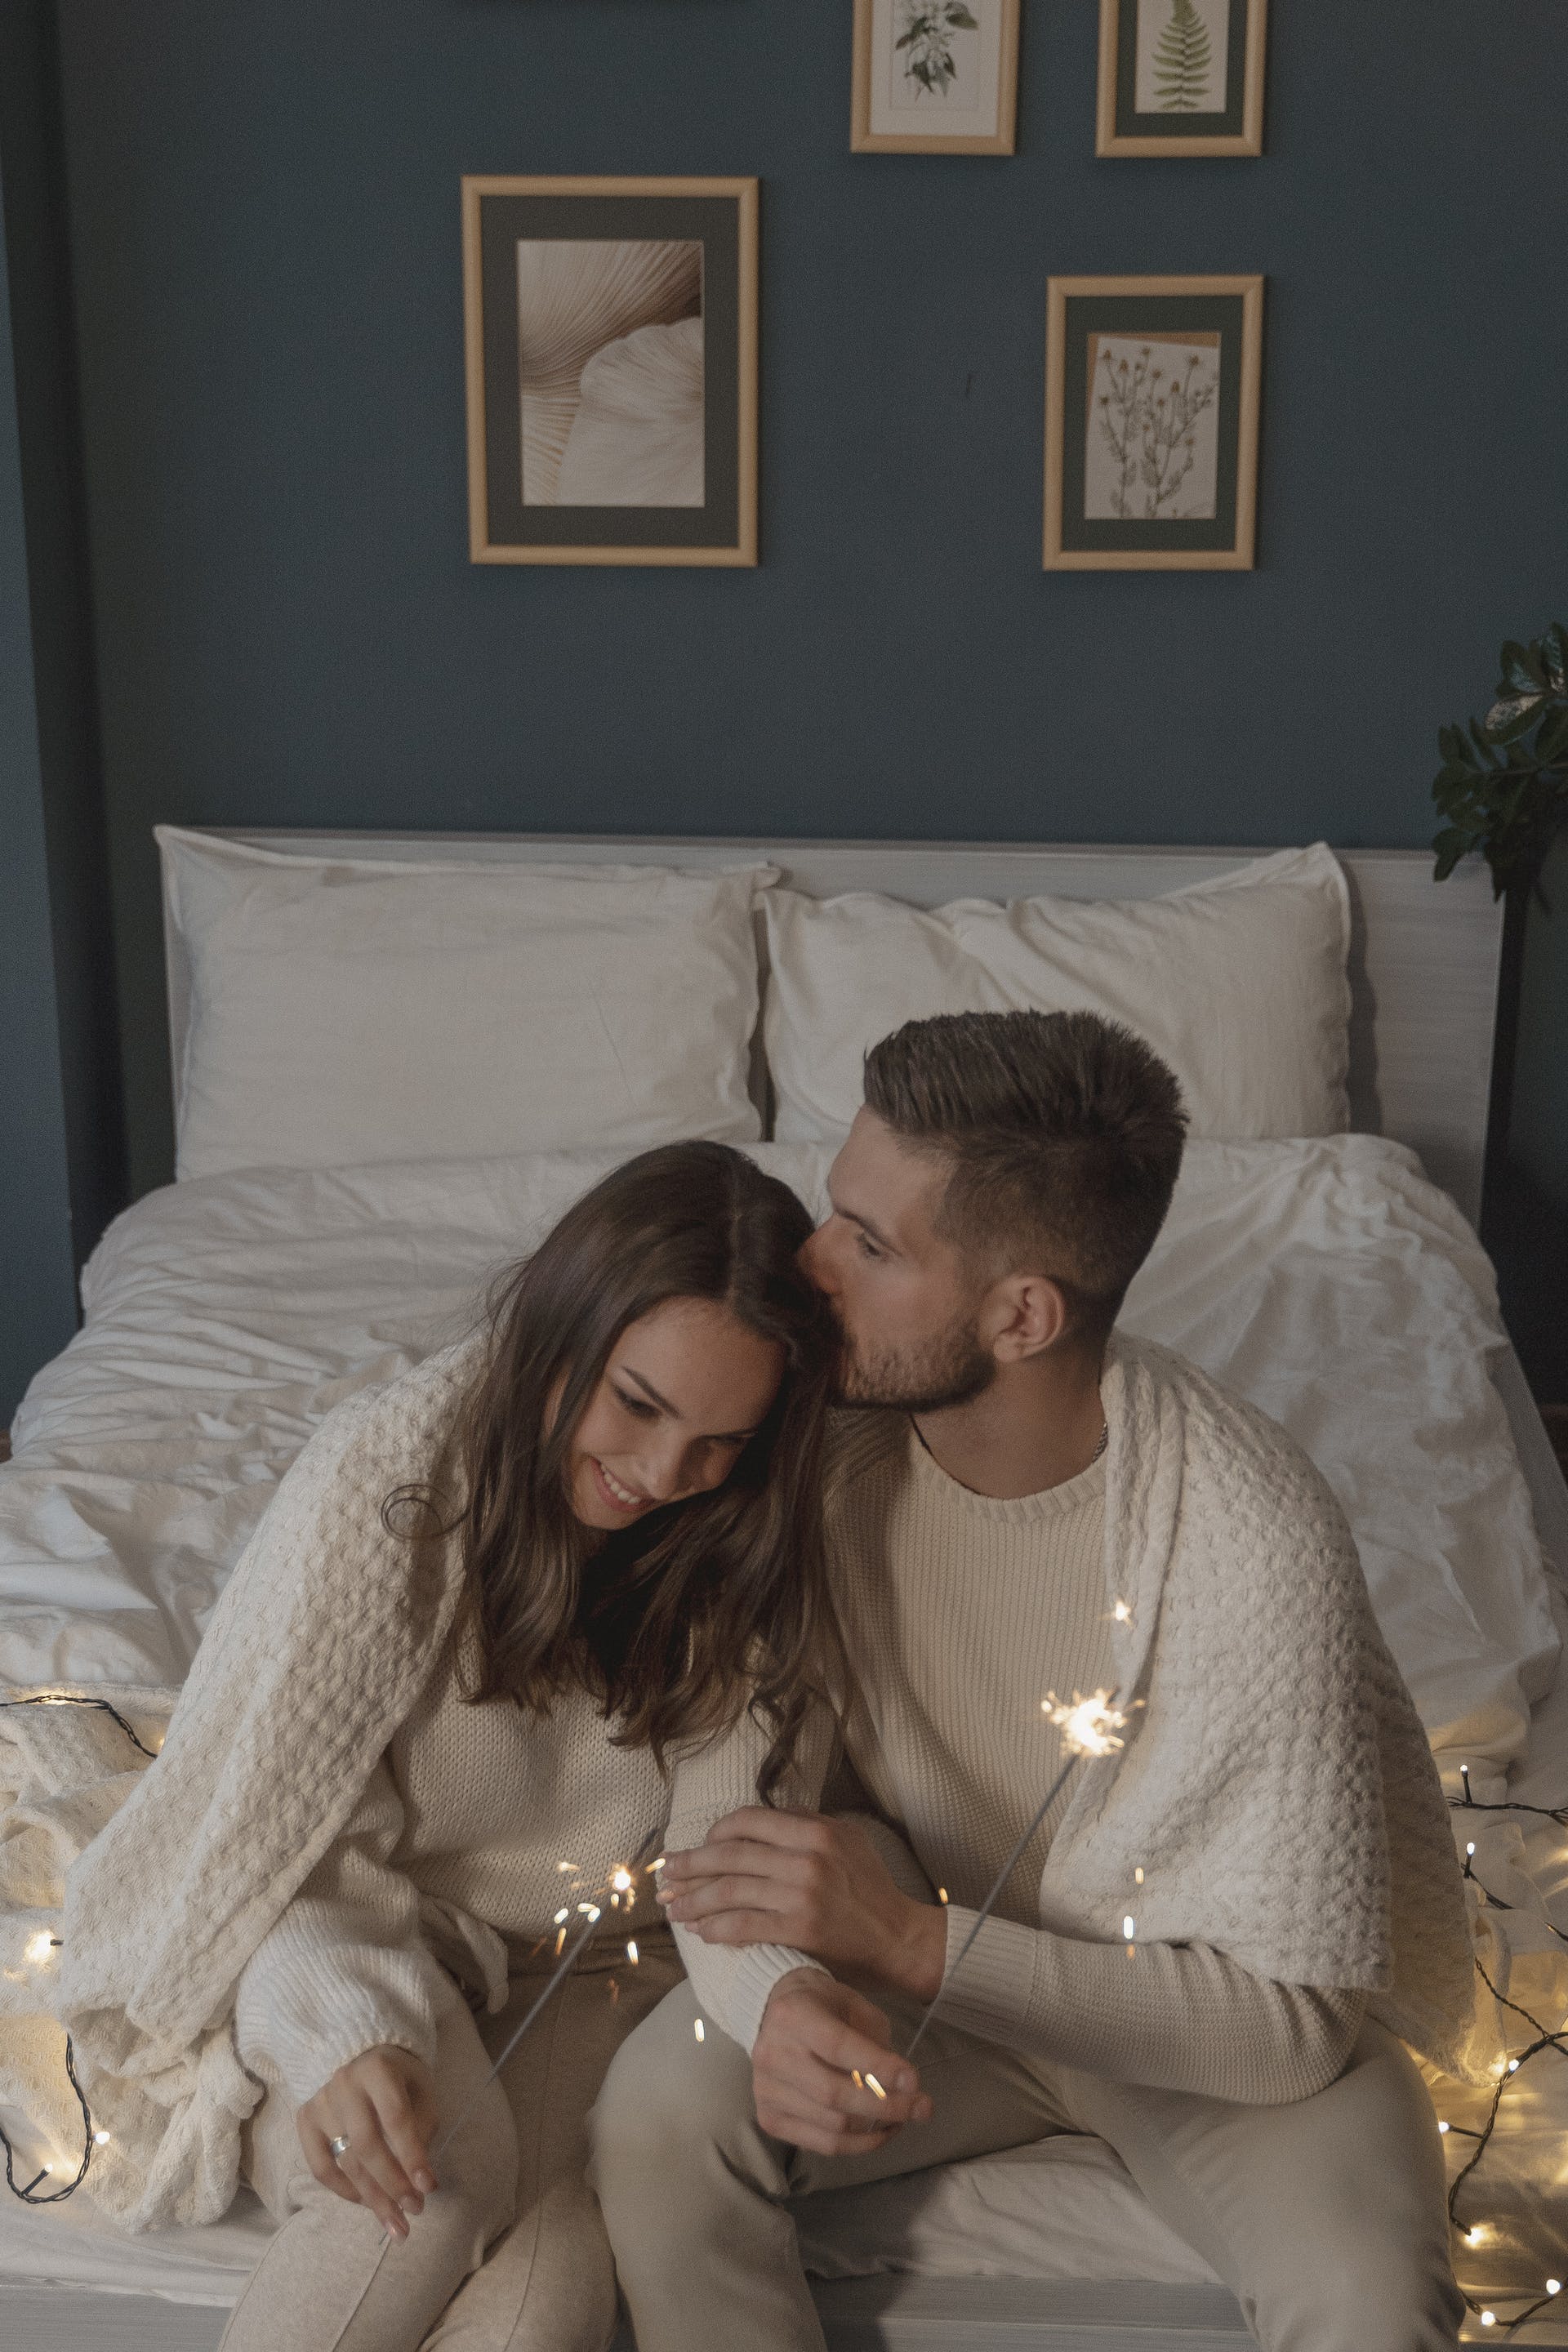 A man kissing a woman on top of her head in their bedroom while holding sparklers | Source: Pexels